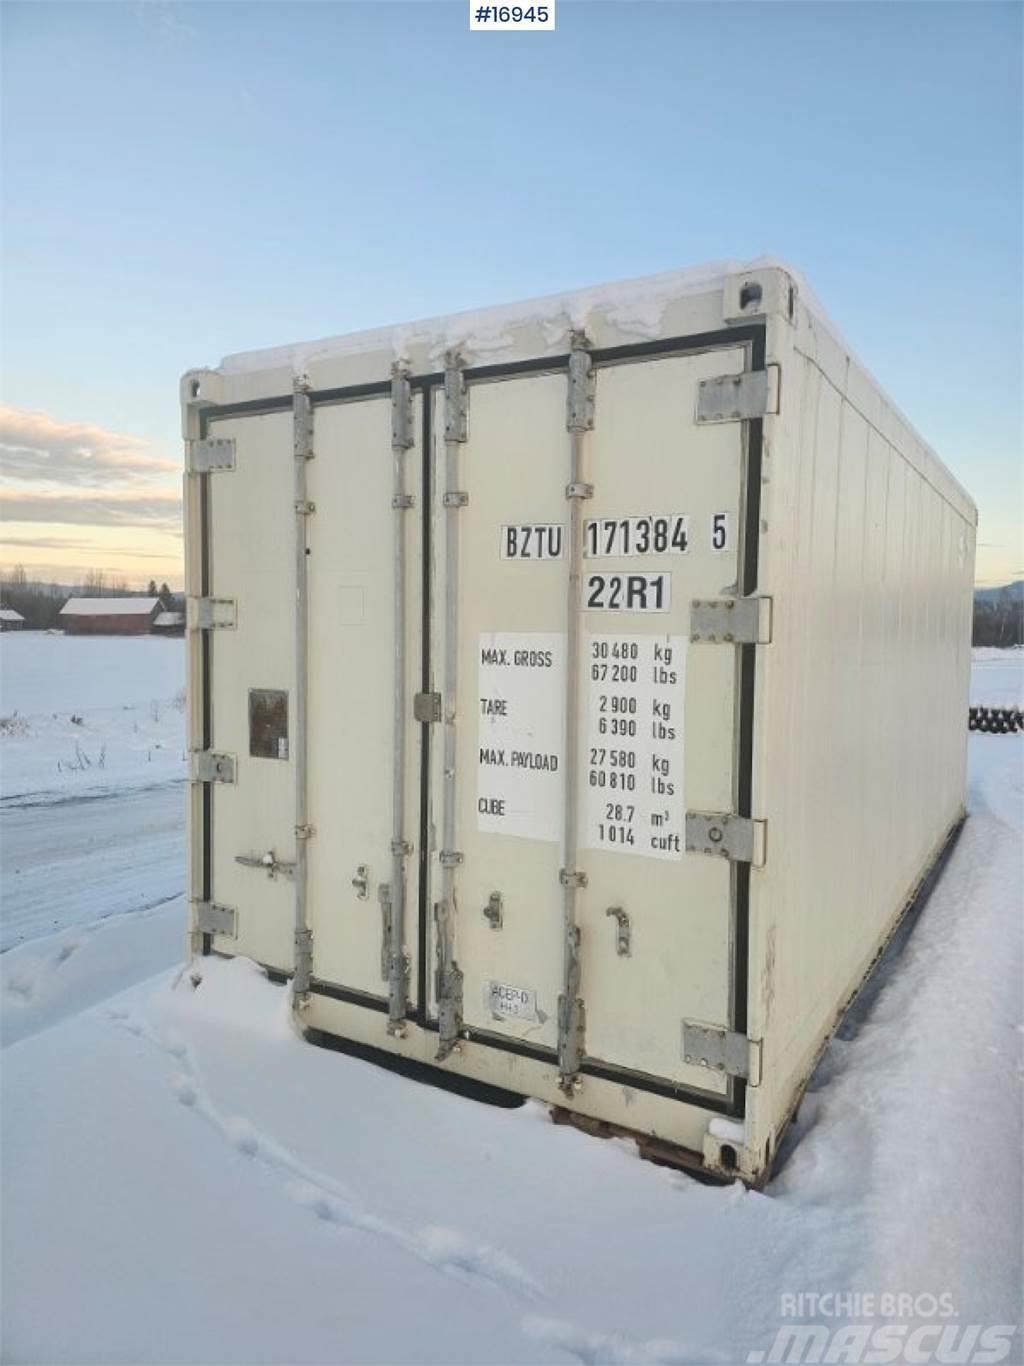  Kjølecontainer m/ Thermo king aggregat Other